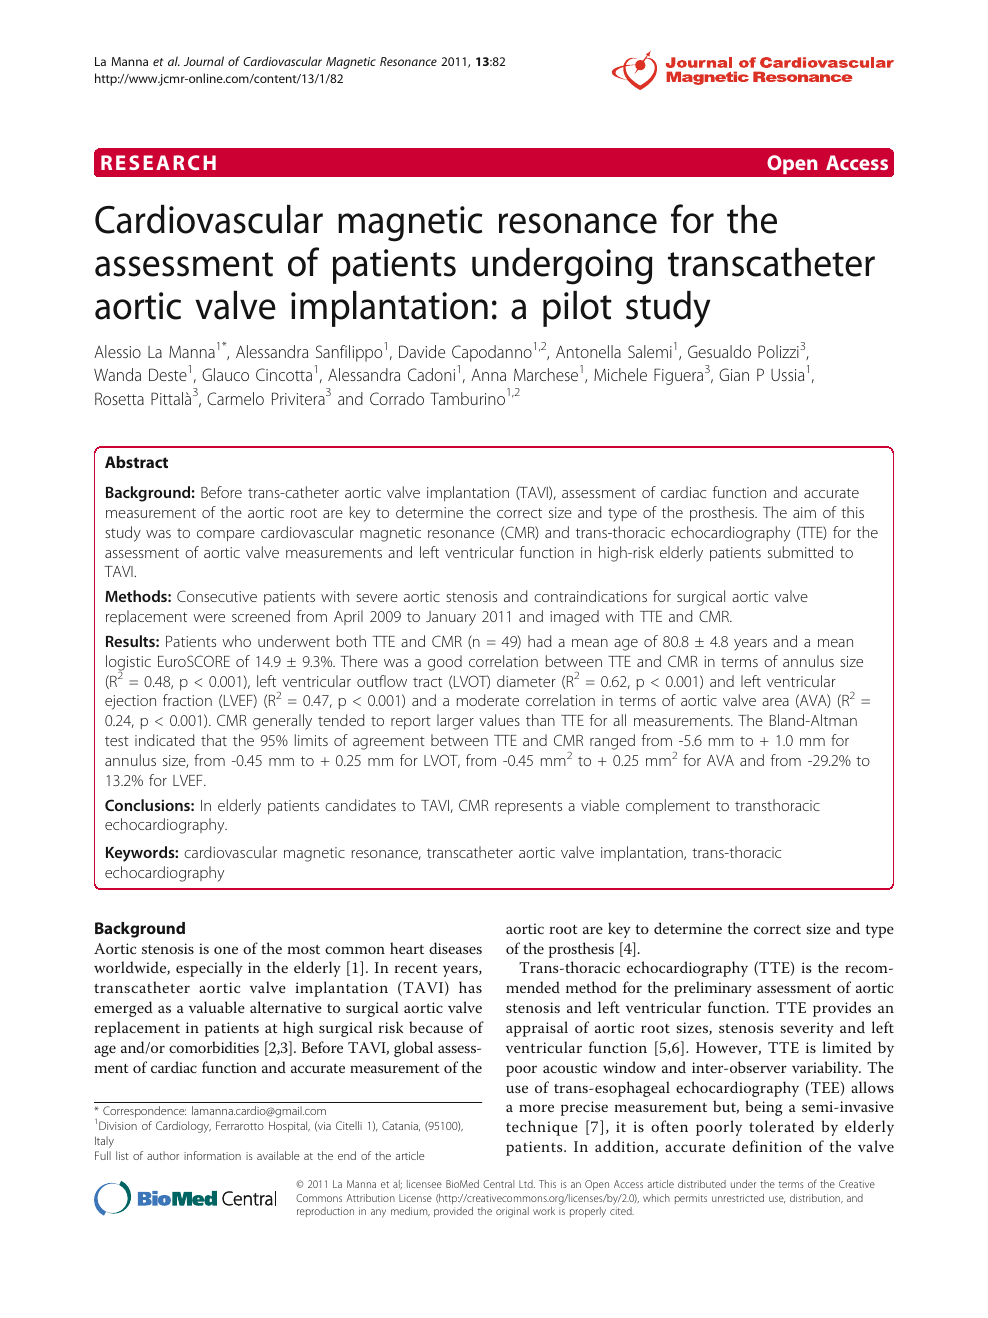 Cardiovascular Magnetic Resonance For The Assessment Of Patients Undergoing Transcatheter Aortic Valve Implantation A Pilot Study Topic Of Research Paper In Clinical Medicine Download Scholarly Article Pdf And Read For Free